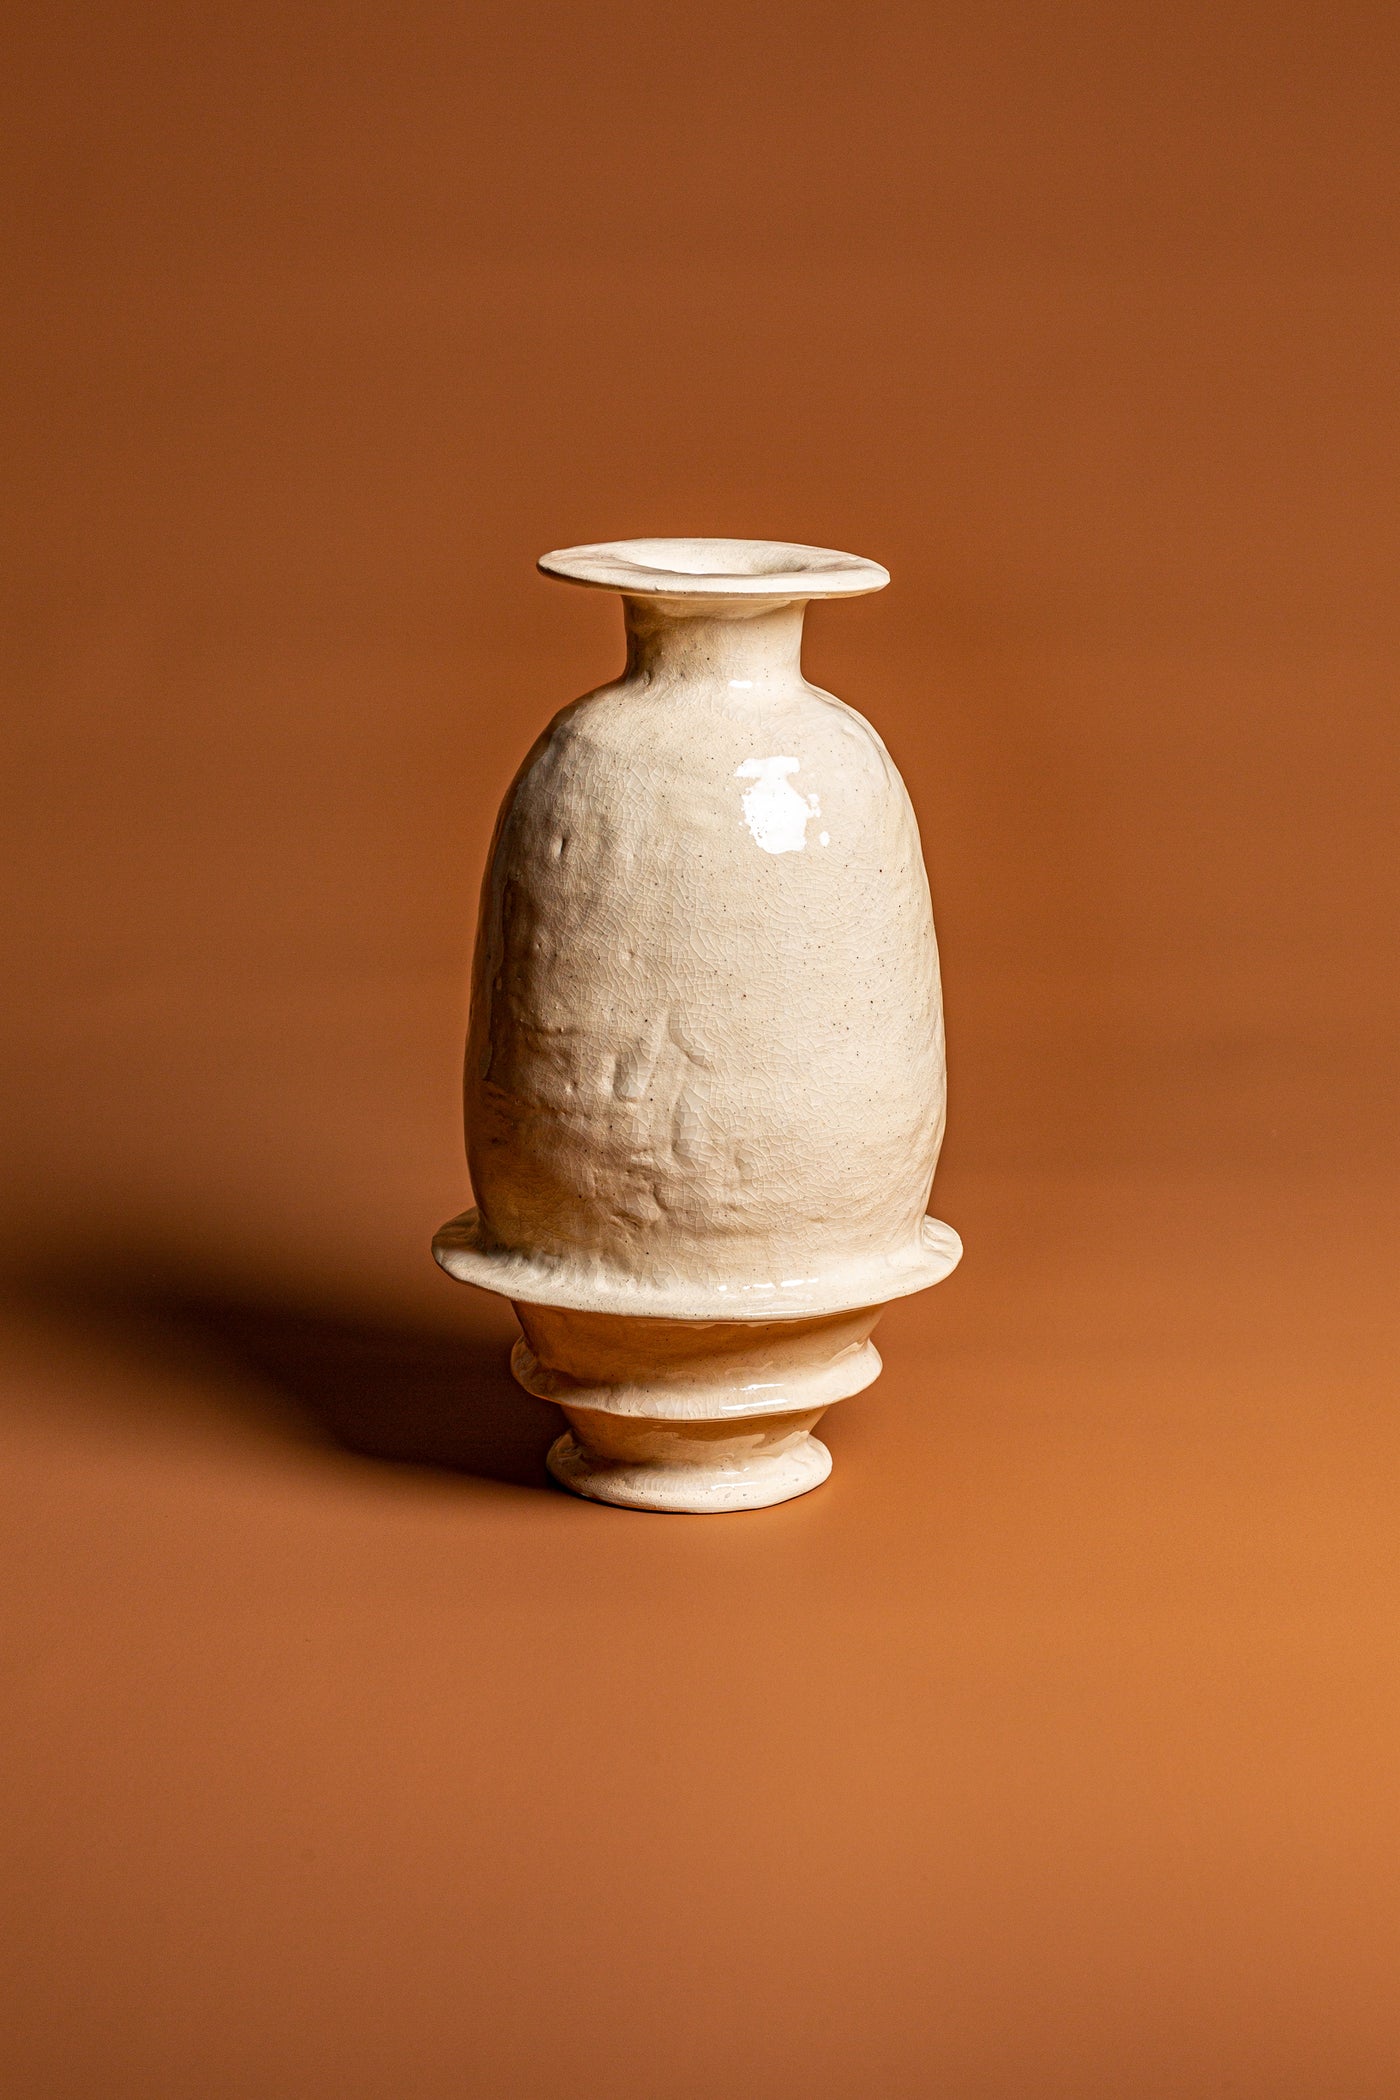 Uninhibited designs, with purity of process and experimentation we see the artist’s mark in this handcrafted sculptural vase.  A natural, beautiful piece of Australian homeware.  Type: Vase  Materials: Ceramic  Dimensions: 270 x 120mm 